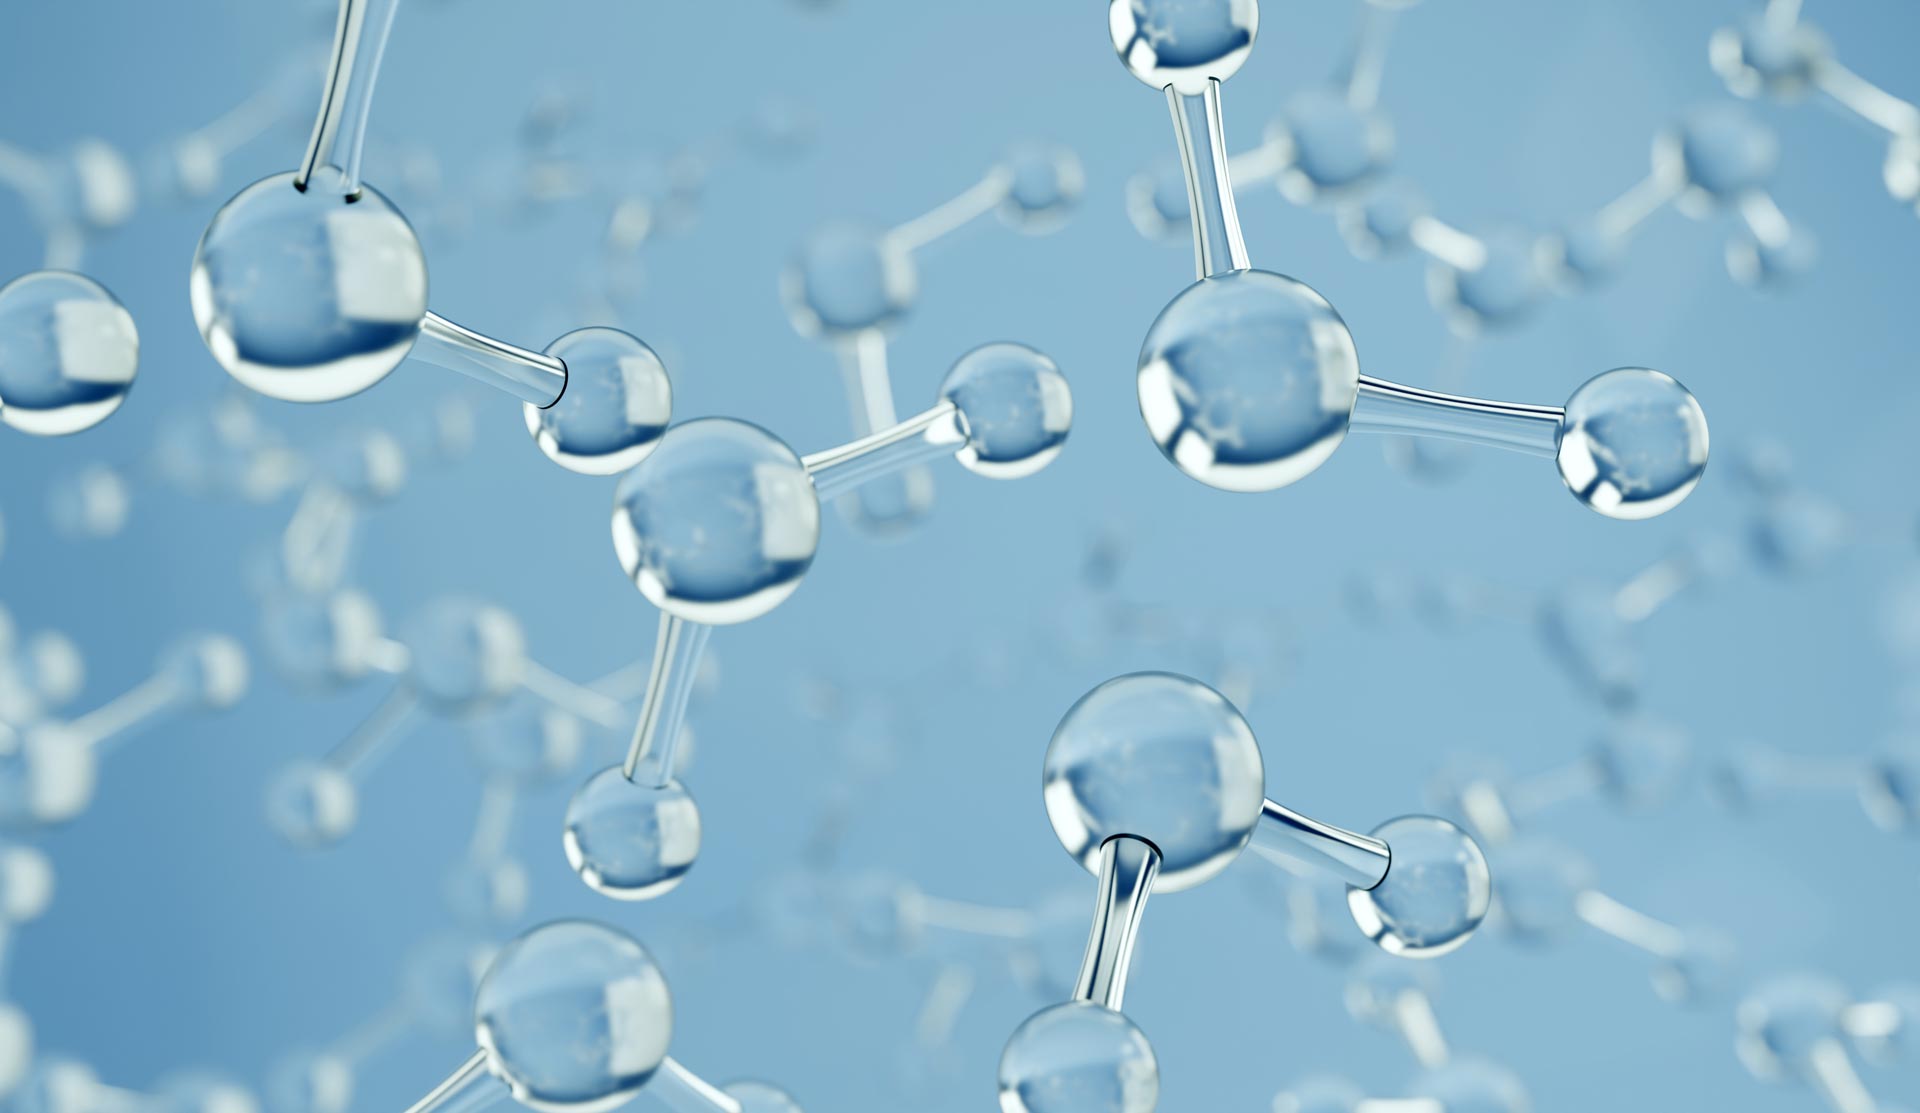 A collection of water molecules set on a blue background.